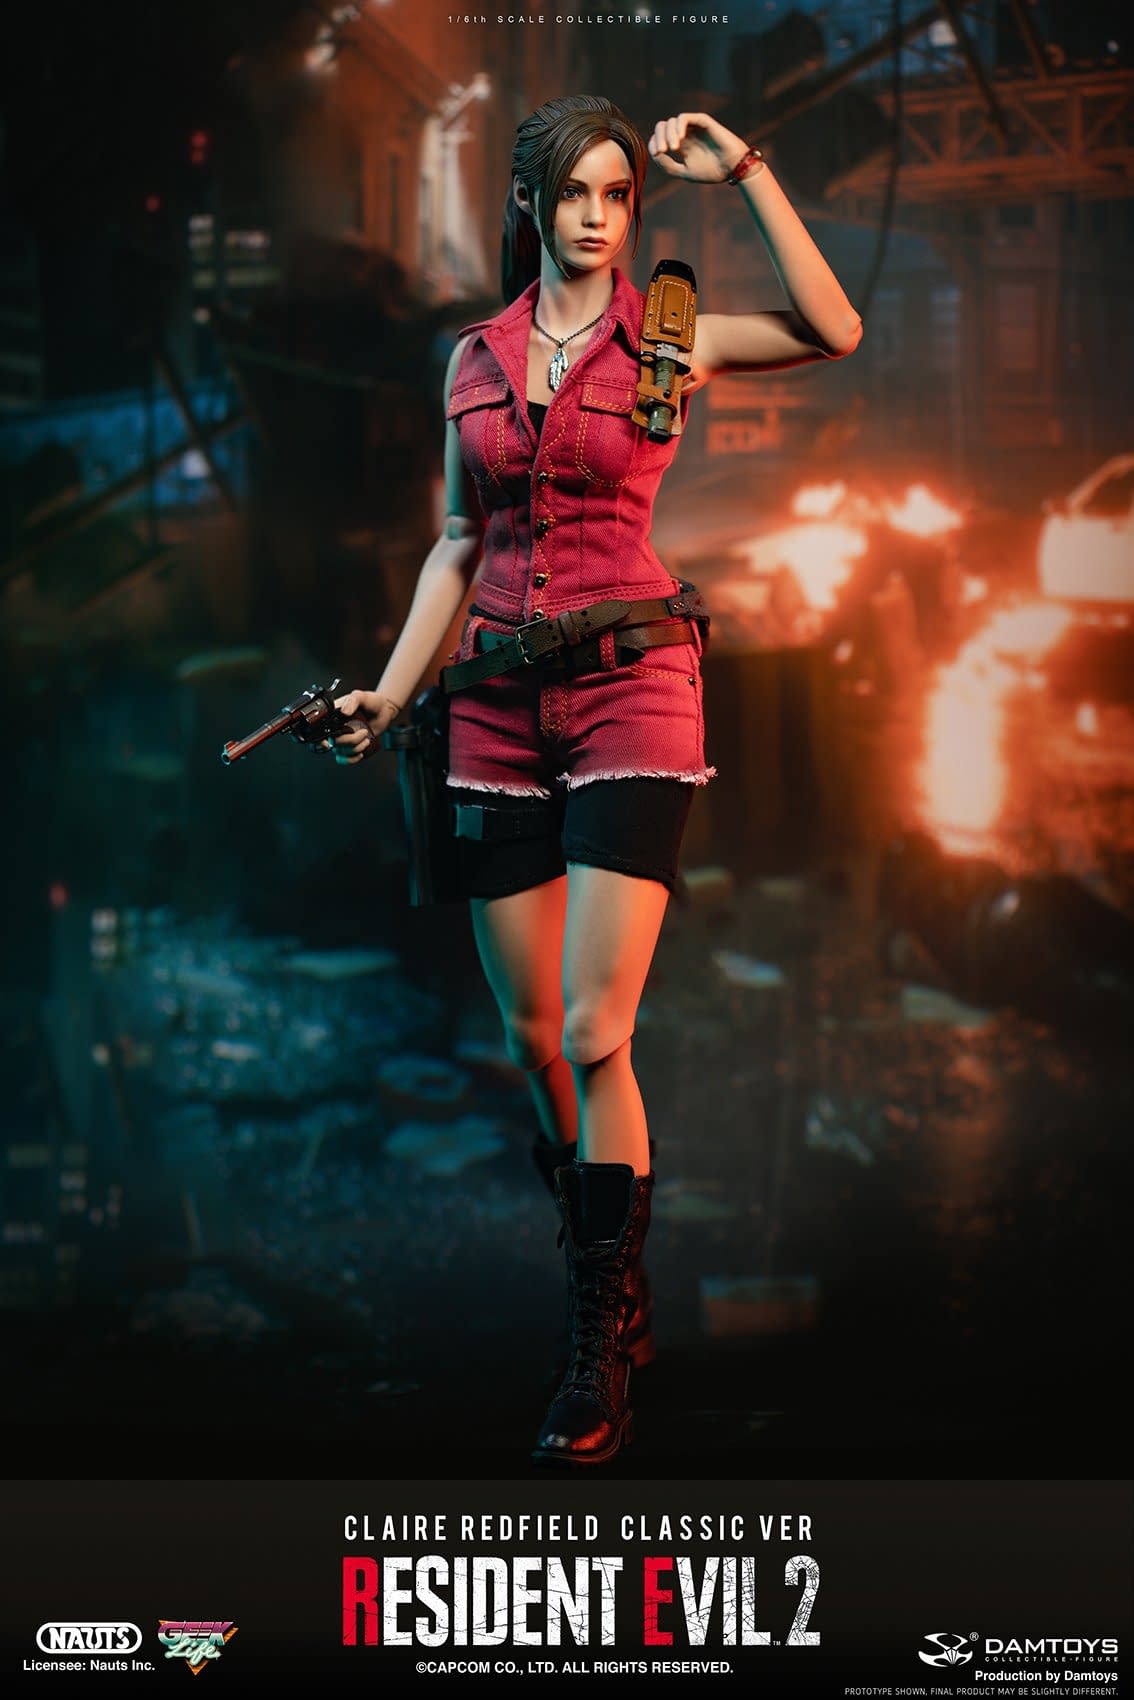 Resident Evil 2's Claire Redfield Gets a Badass Figure from DAMTOYS